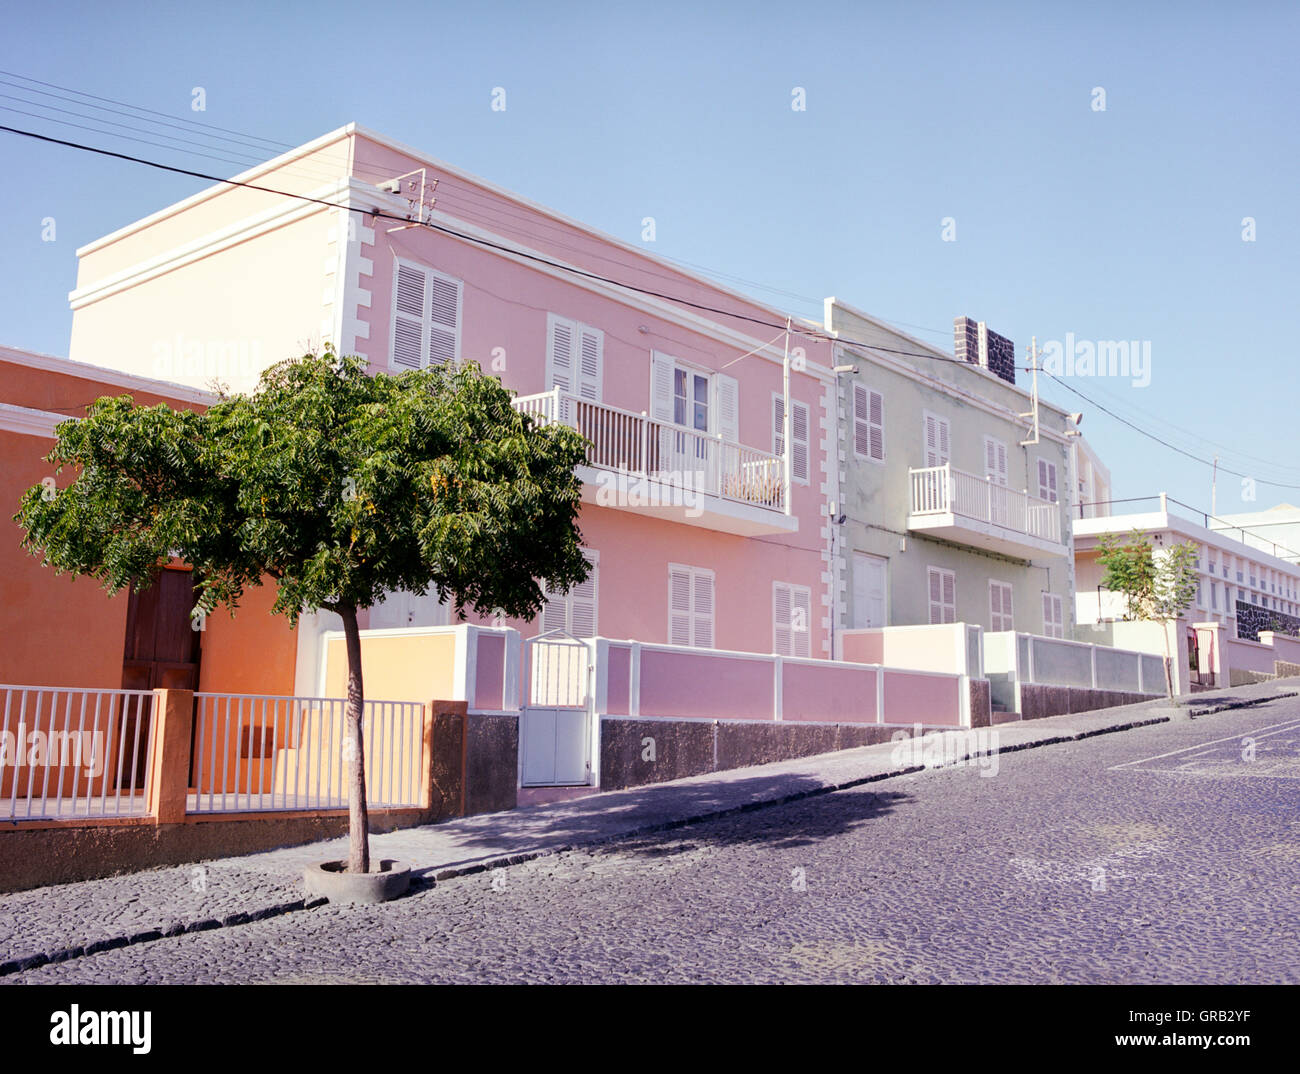 Local homes in the town of Sao Felipe, Fogo, Cape Verde, Africa. Stock Photo